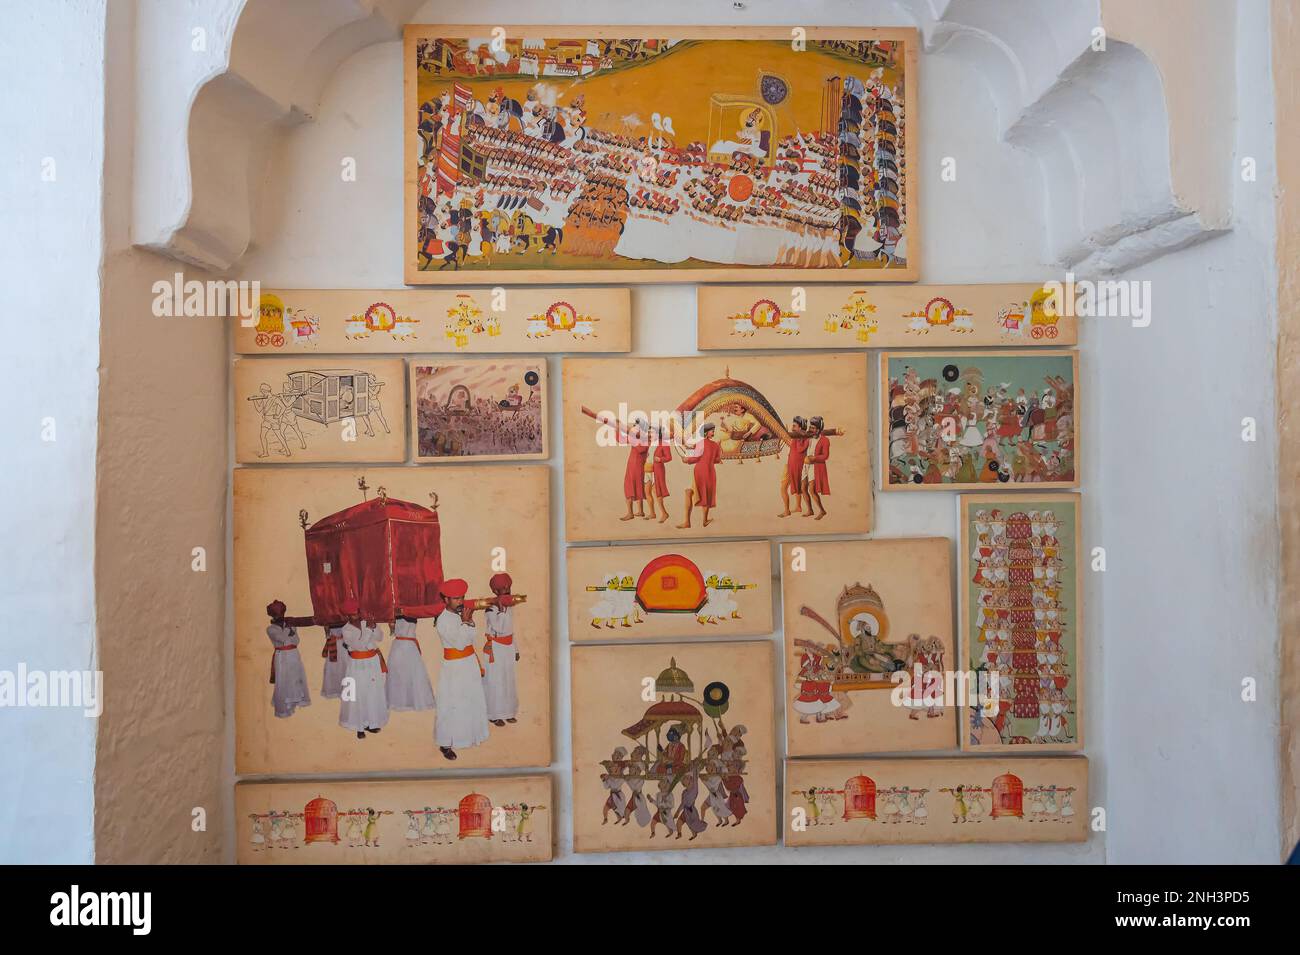 Jodhpur, Rajasthan, India - 19th October 2019 : Pictorial illustrations of palanquin, sedan chair or palki and elephant howdahs carrying Maharajas. Stock Photo